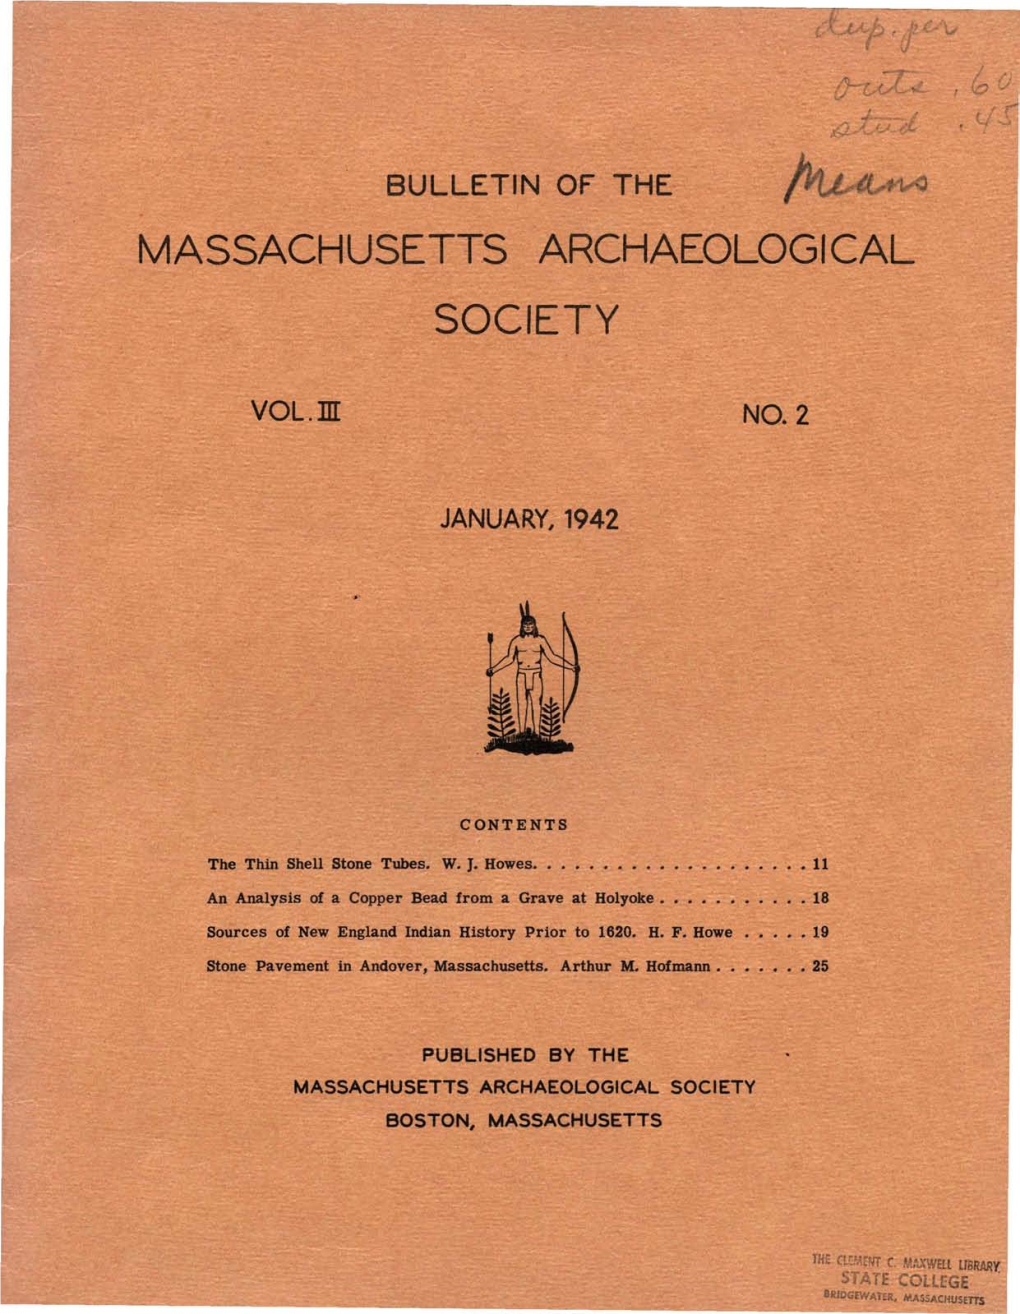 Bulletin of the Massachusetts Archaeological Society, Vol. 3, No